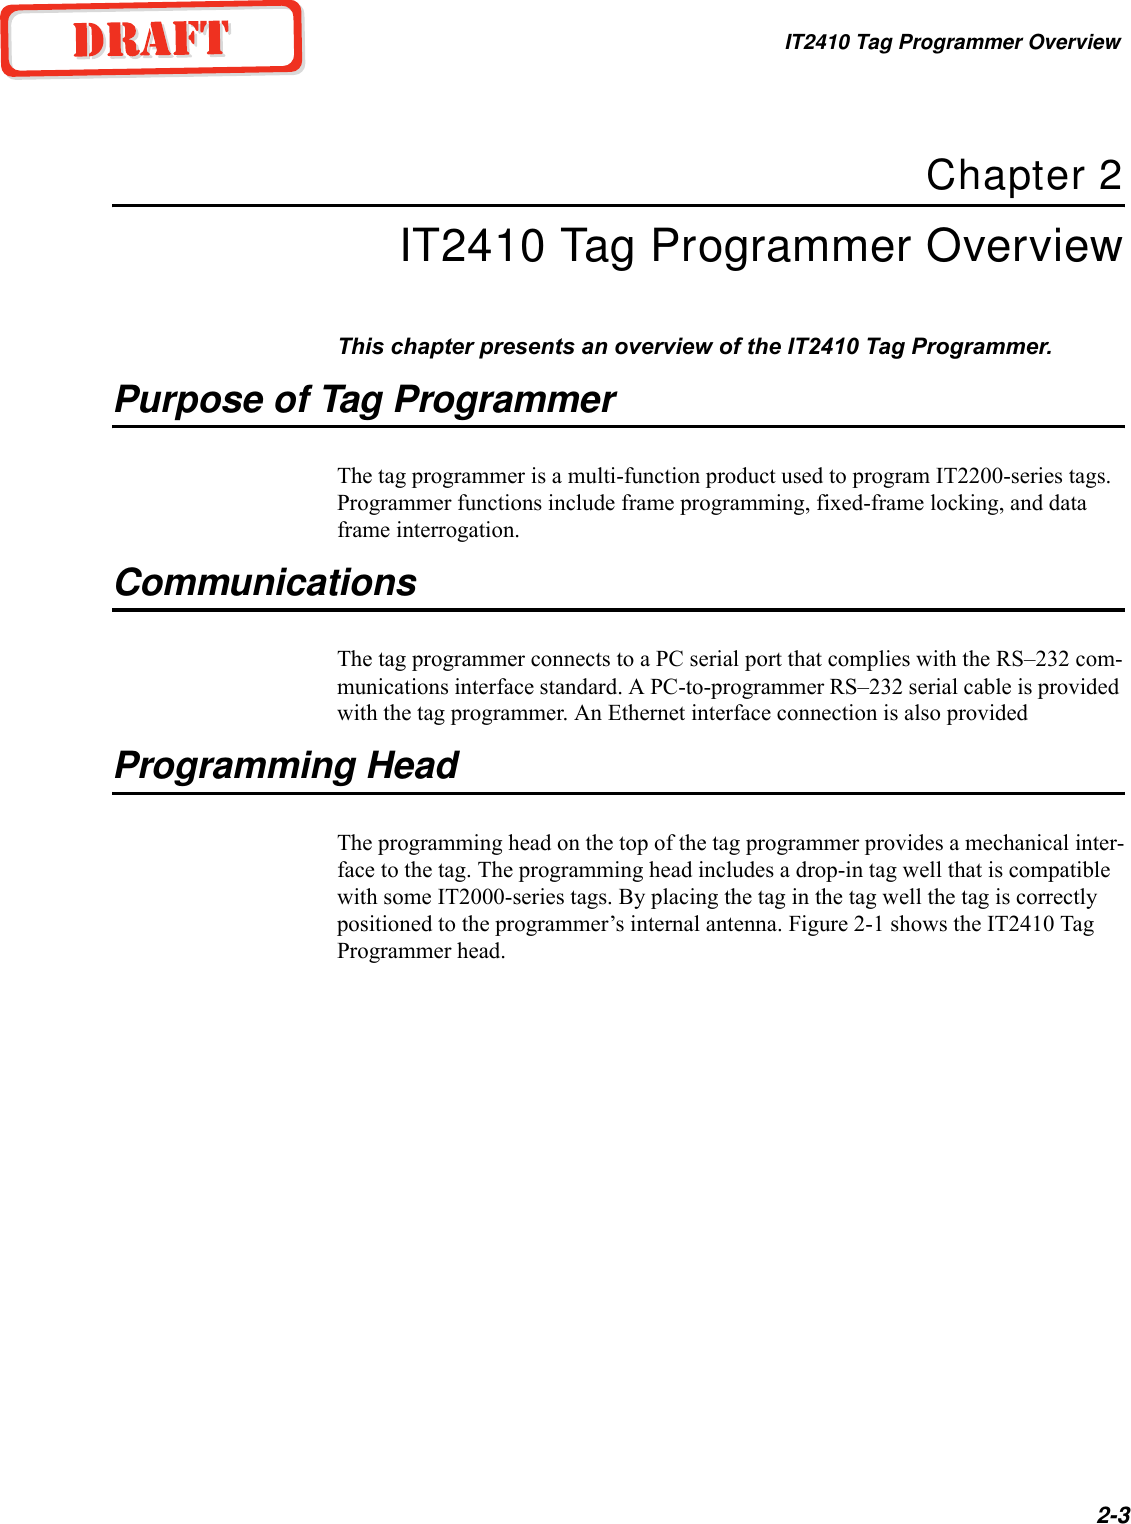 IT2410 Tag Programmer Overview2-3Chapter 2IT2410 Tag Programmer OverviewThis chapter presents an overview of the IT2410 Tag Programmer.Purpose of Tag ProgrammerThe tag programmer is a multi-function product used to program IT2200-series tags. Programmer functions include frame programming, fixed-frame locking, and data frame interrogation.CommunicationsThe tag programmer connects to a PC serial port that complies with the RS–232 com-munications interface standard. A PC-to-programmer RS–232 serial cable is provided with the tag programmer. An Ethernet interface connection is also provided Programming HeadThe programming head on the top of the tag programmer provides a mechanical inter-face to the tag. The programming head includes a drop-in tag well that is compatible with some IT2000-series tags. By placing the tag in the tag well the tag is correctly positioned to the programmer’s internal antenna. Figure 2-1 shows the IT2410 Tag Programmer head.